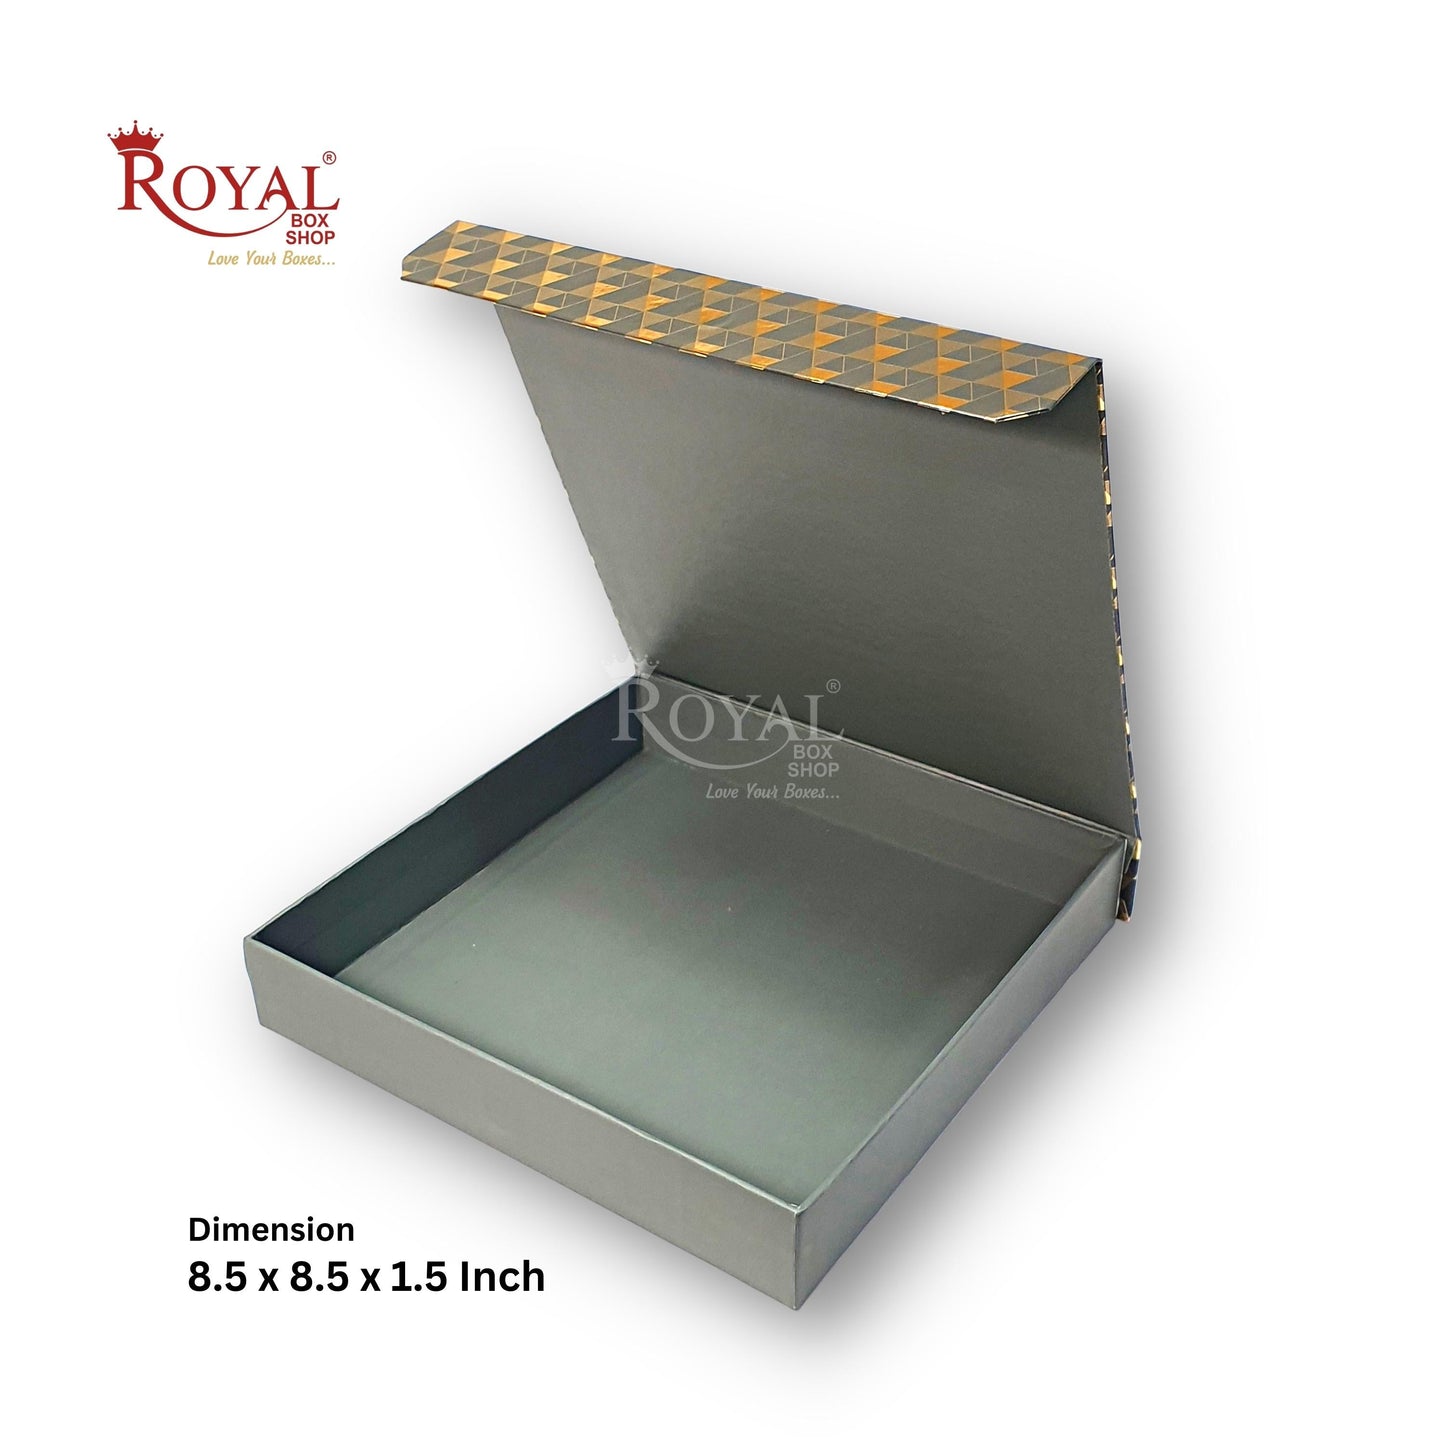 Rigid Chocolate Boxes 25 Cavity With Magnetic Flap I Grey with Gold Foiling I 9.5 X 9.5 X 1.5 Inch I Kappa Boxes Royal Box Shop